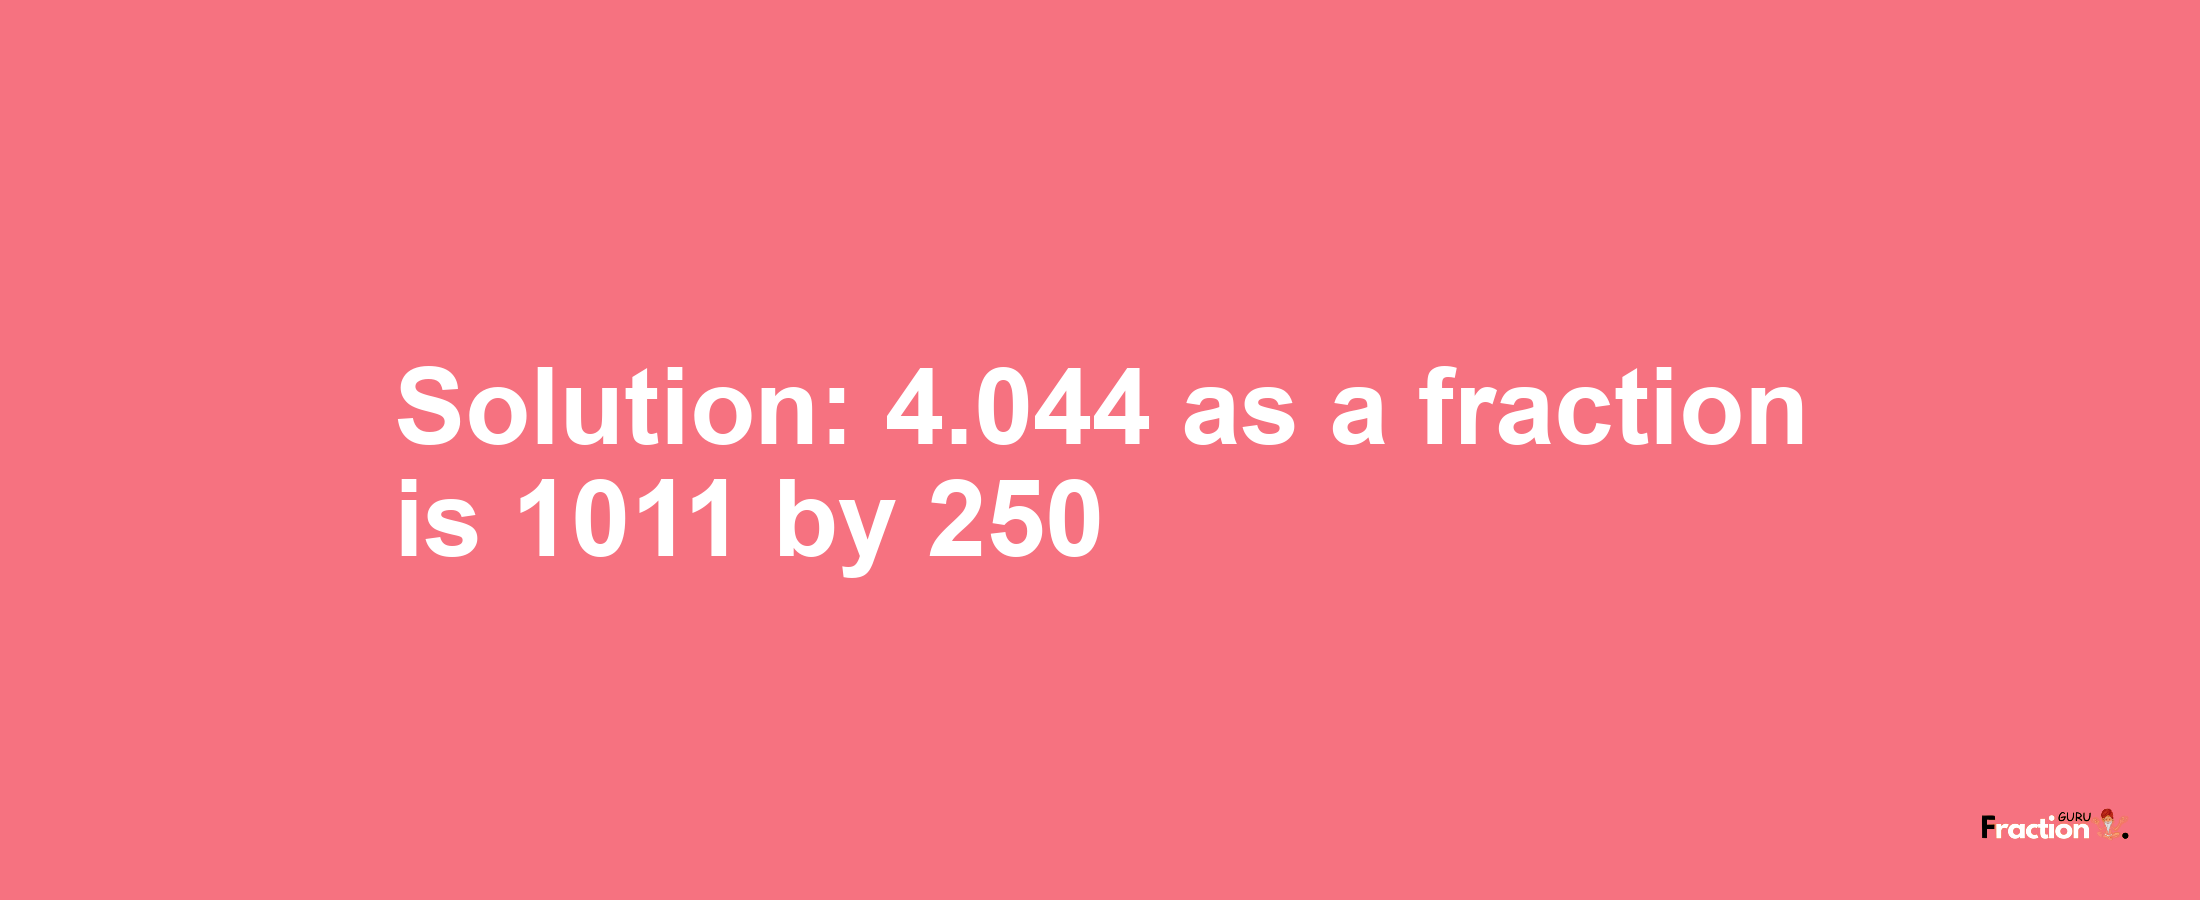 Solution:4.044 as a fraction is 1011/250